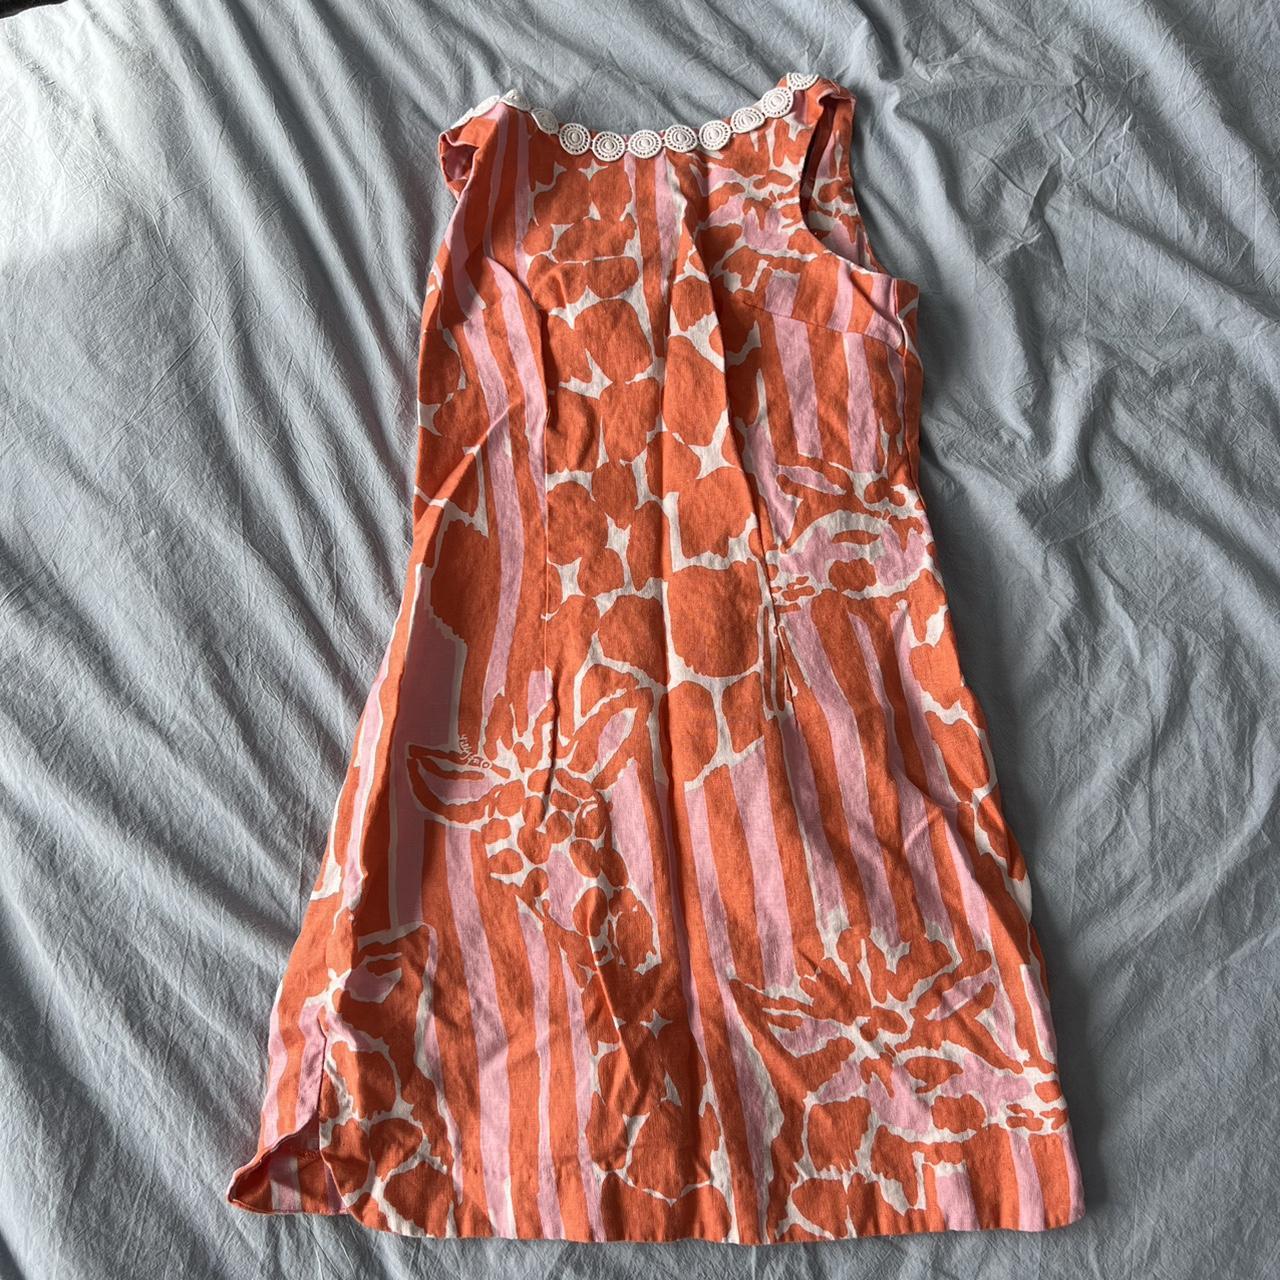 LILLY PULITZER UPF 50+ Luxletic 24 High Rise - Depop